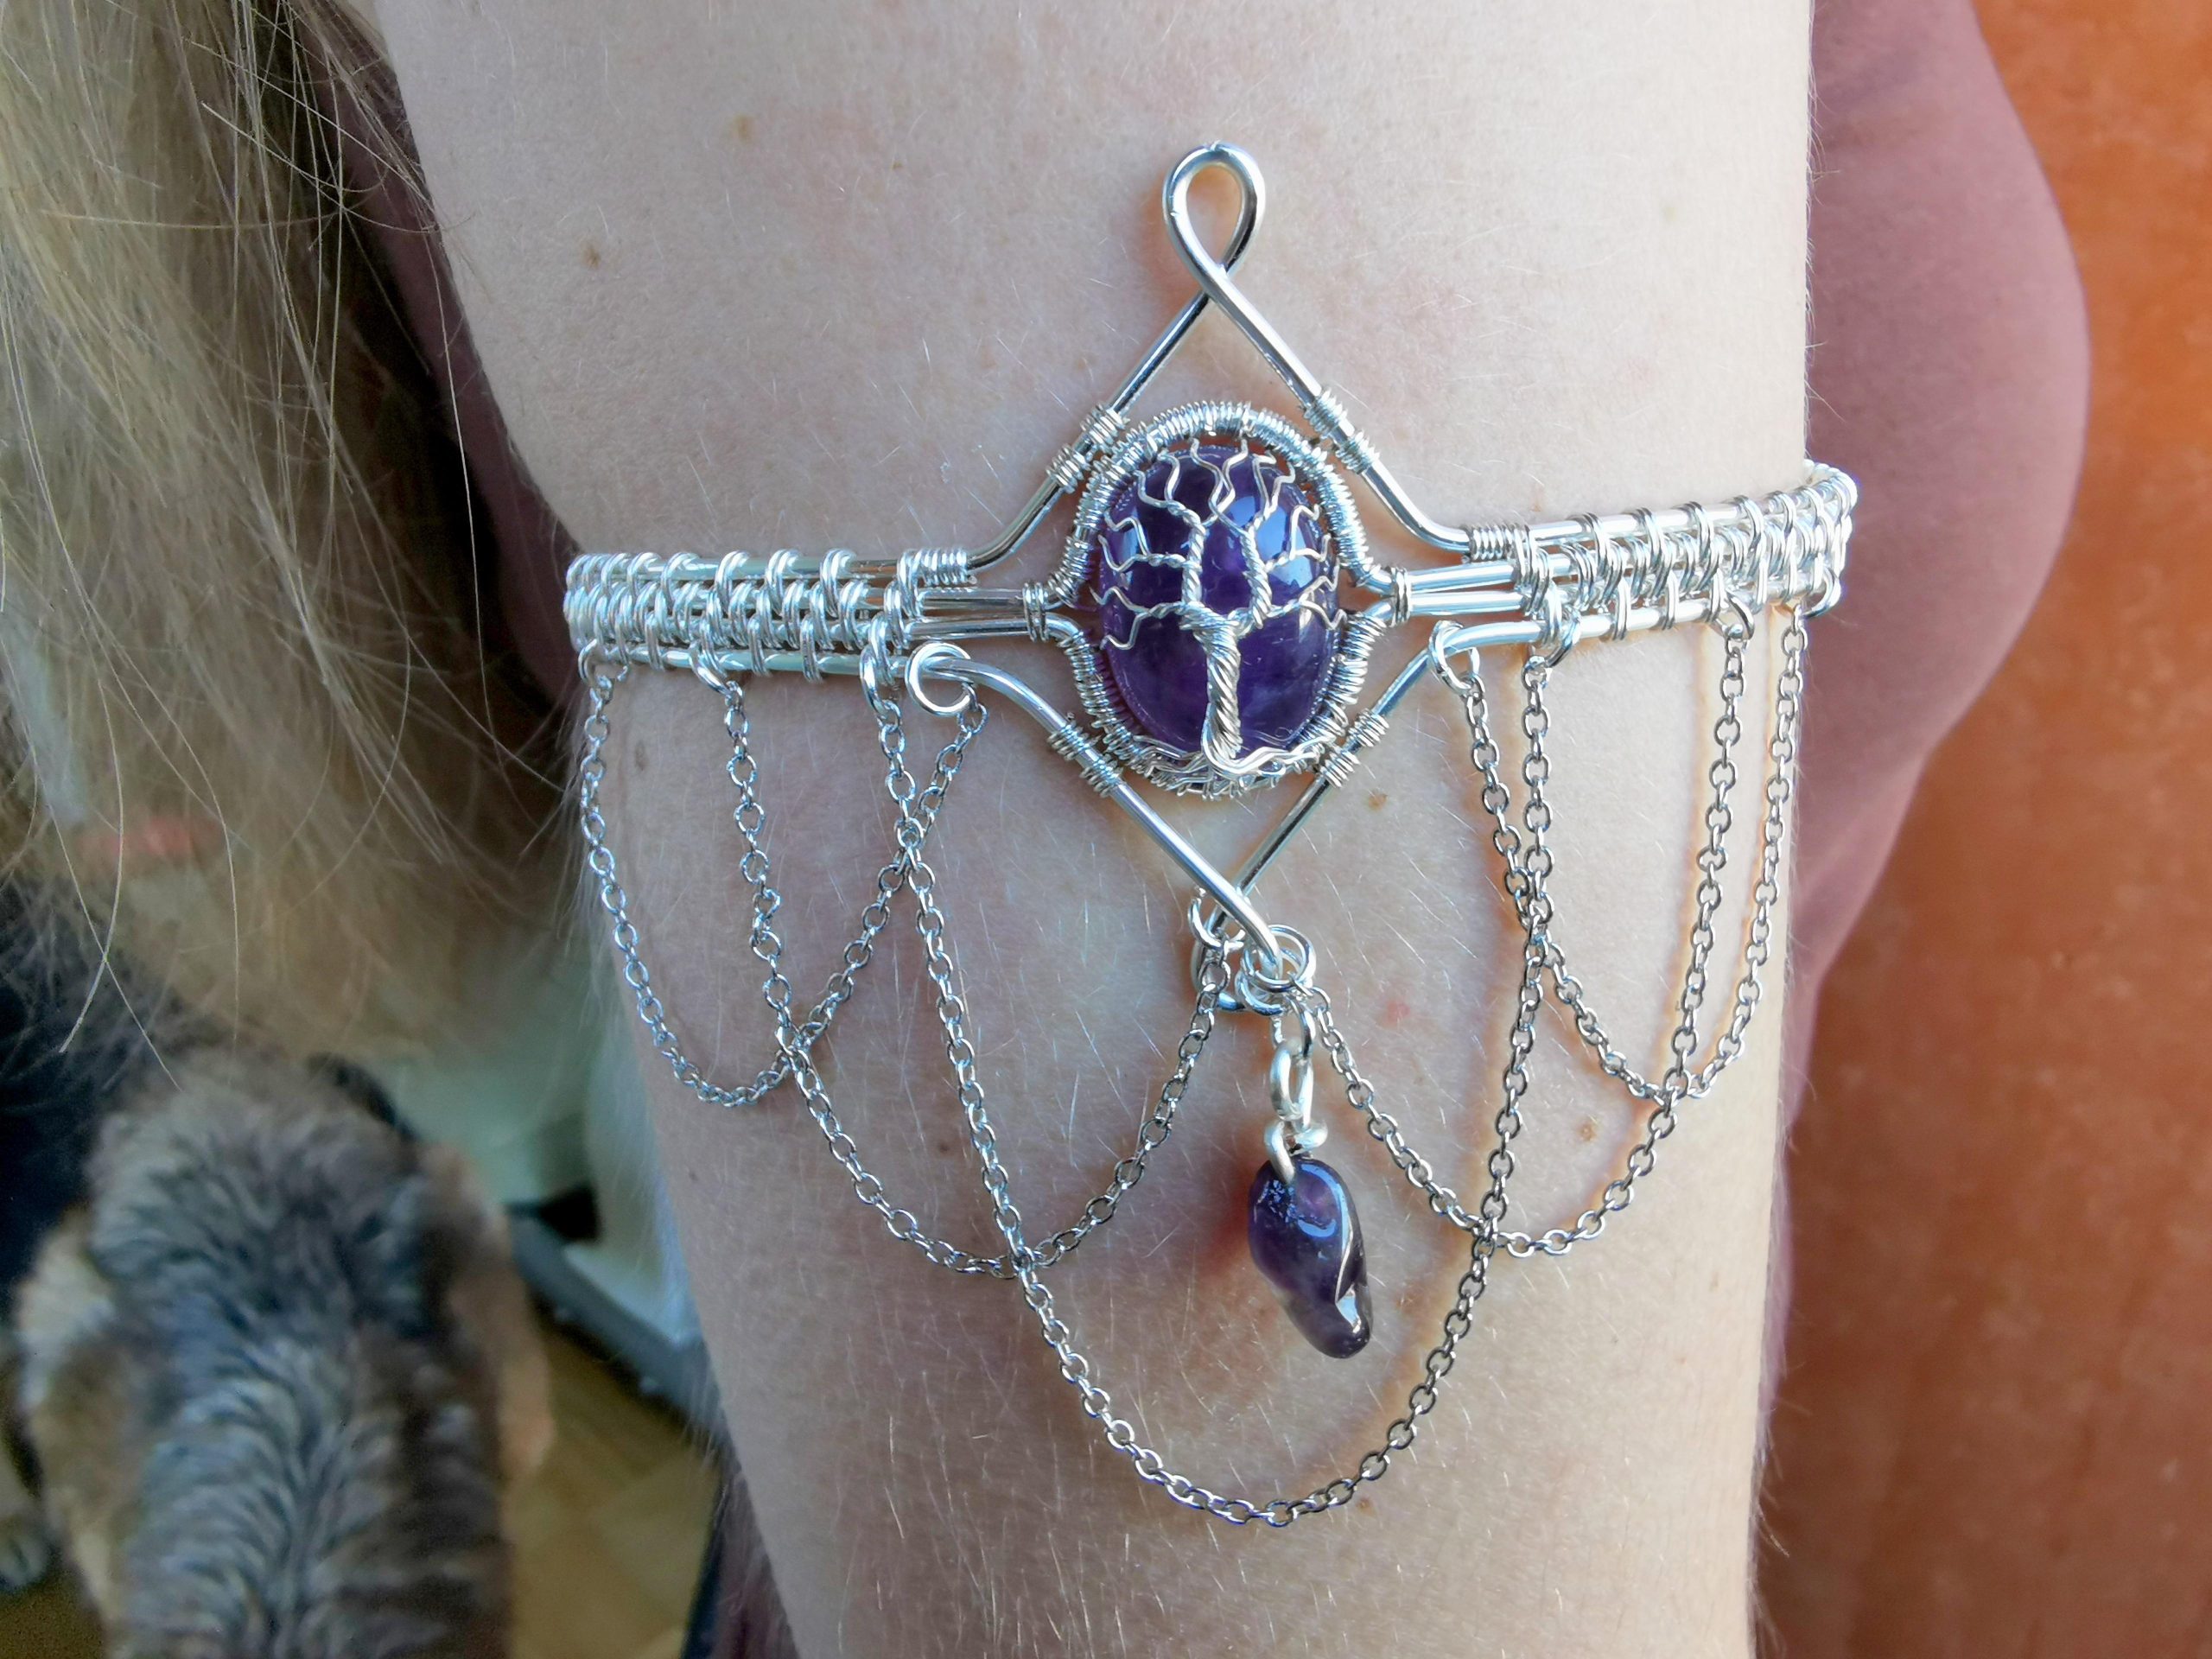 I made a tree armlet with amethyst gems.